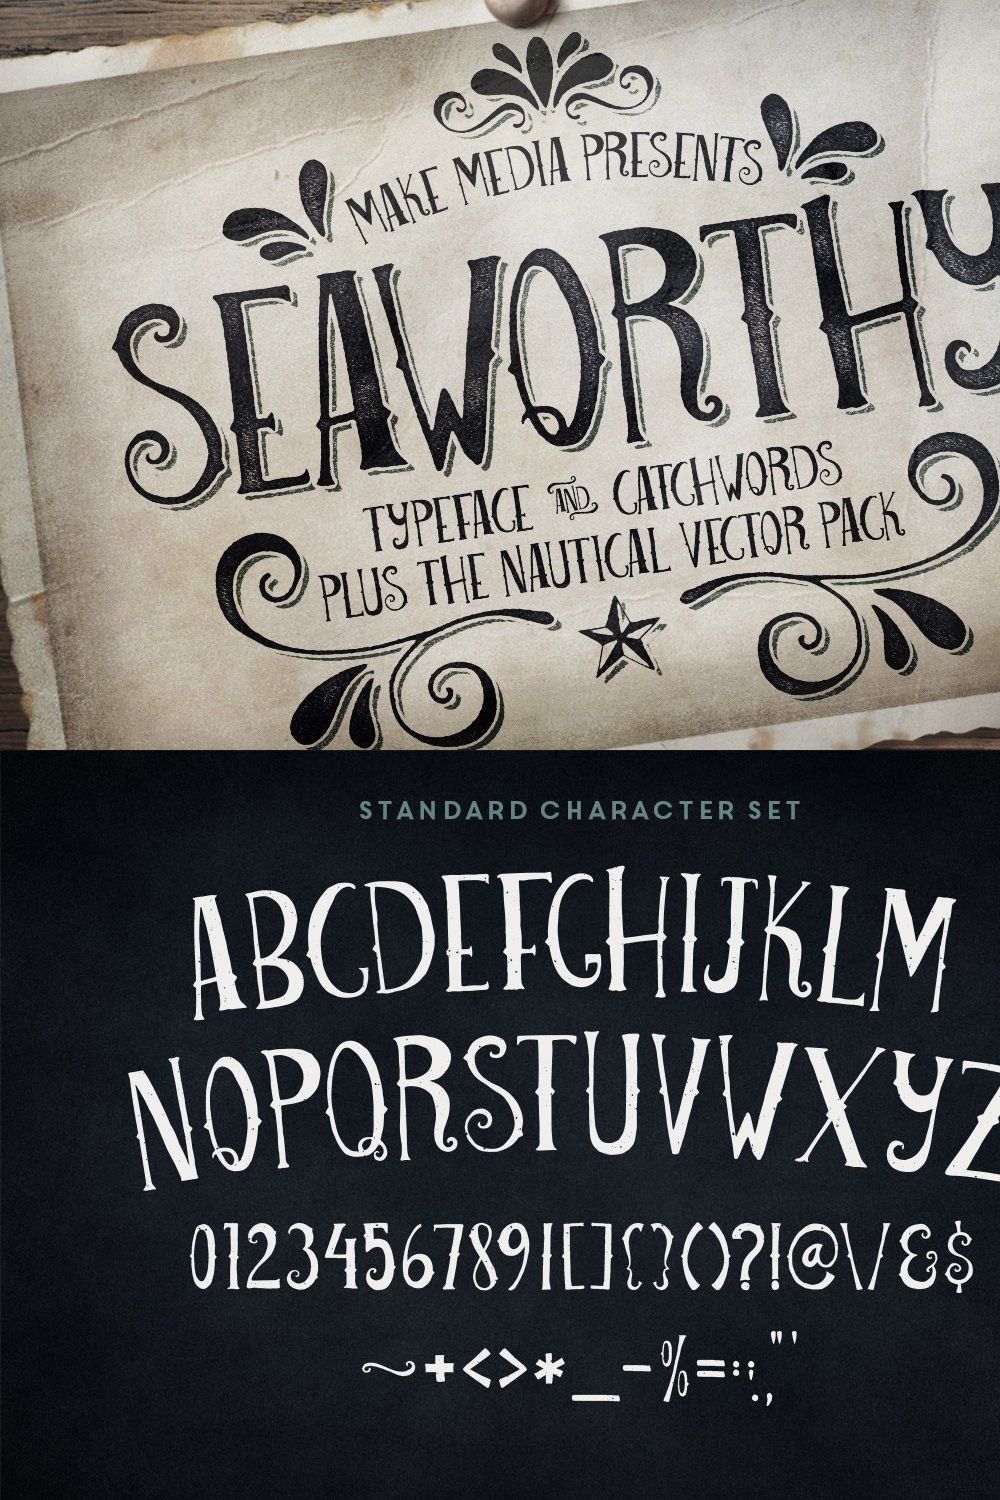 Seaworthy Typeface & Nautical Pack pinterest preview image.